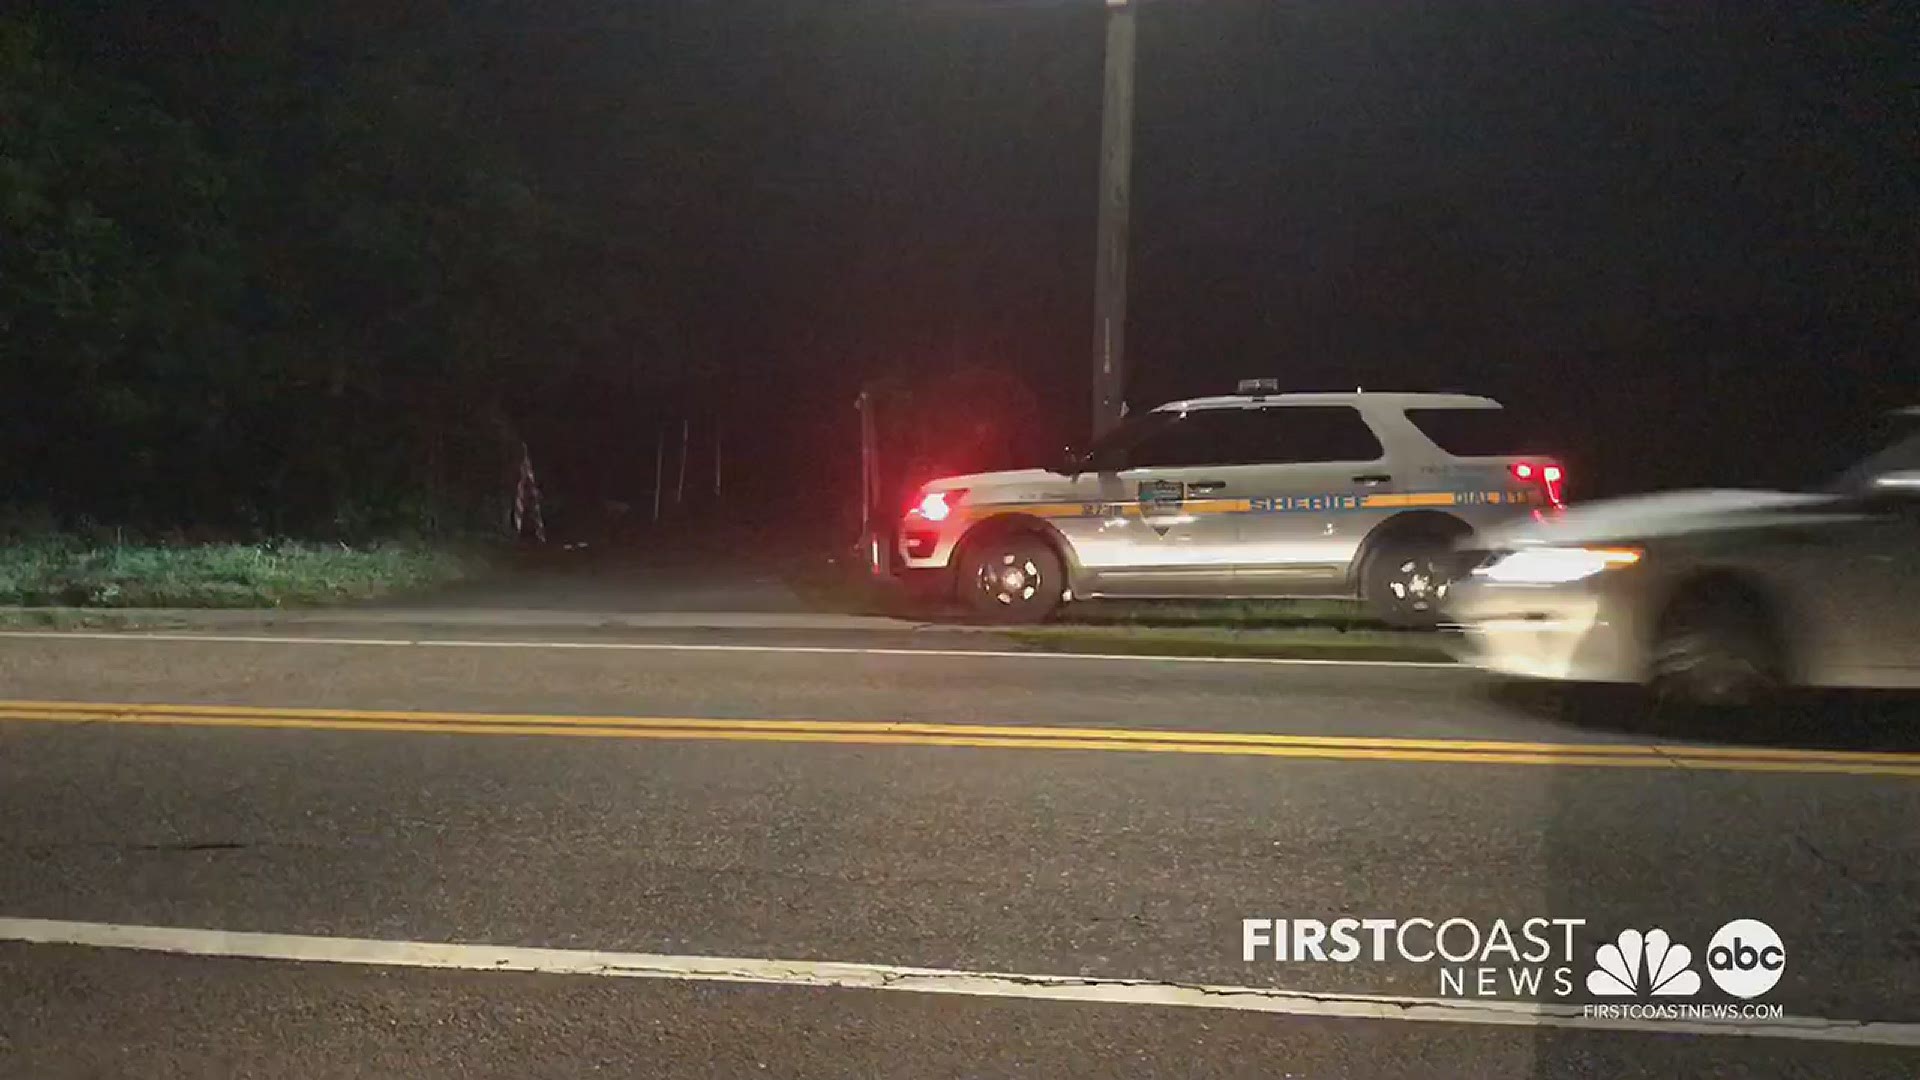 Police said that one person was detained after a shooting at a Westside home killed one person and injured another, according to the Jacksonville Sheriff's Office.